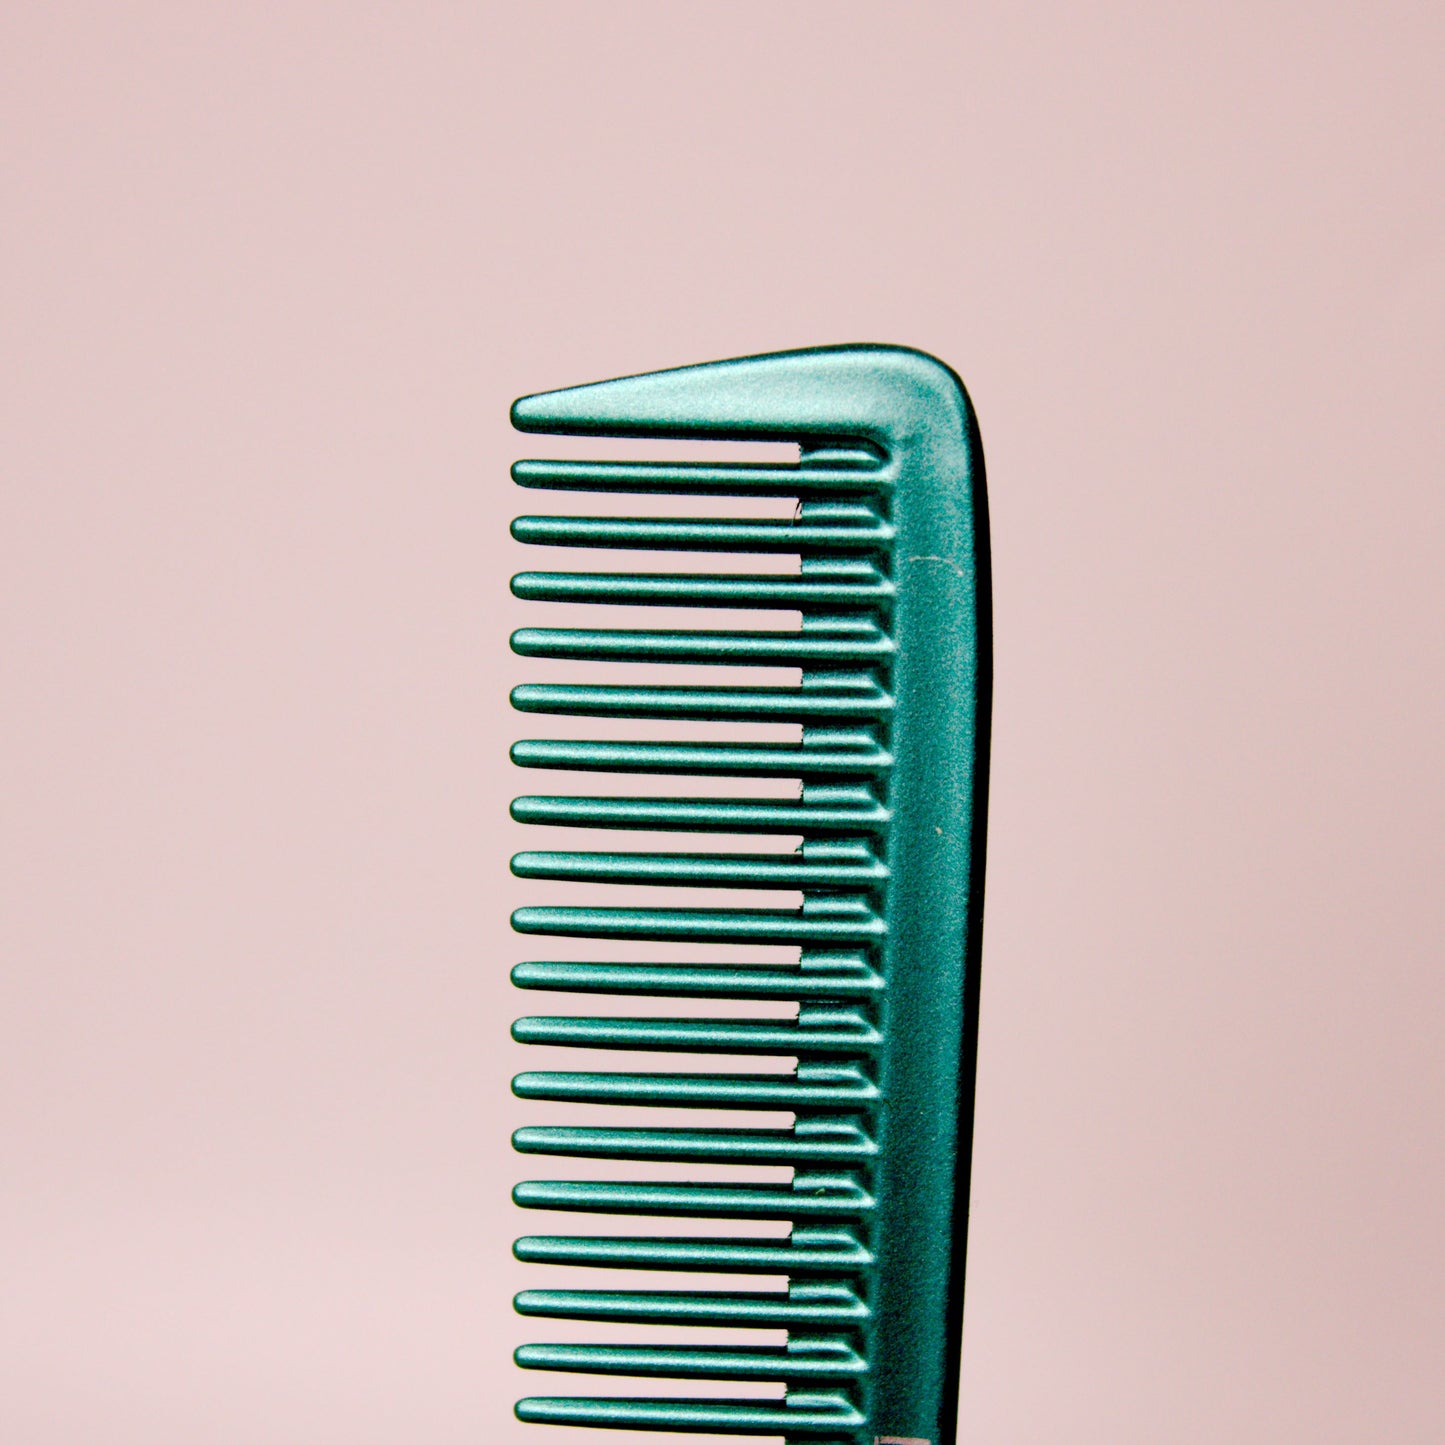 Pegasus MICOLOR 615, 7in Hard Rubber Clipper Comb, Handmade, Seamless, Smooth Edges, Anti Static, Heat and Chemically Resistant, Portable Pocket Purse Dresser Comb | Peines de goma dura - Green